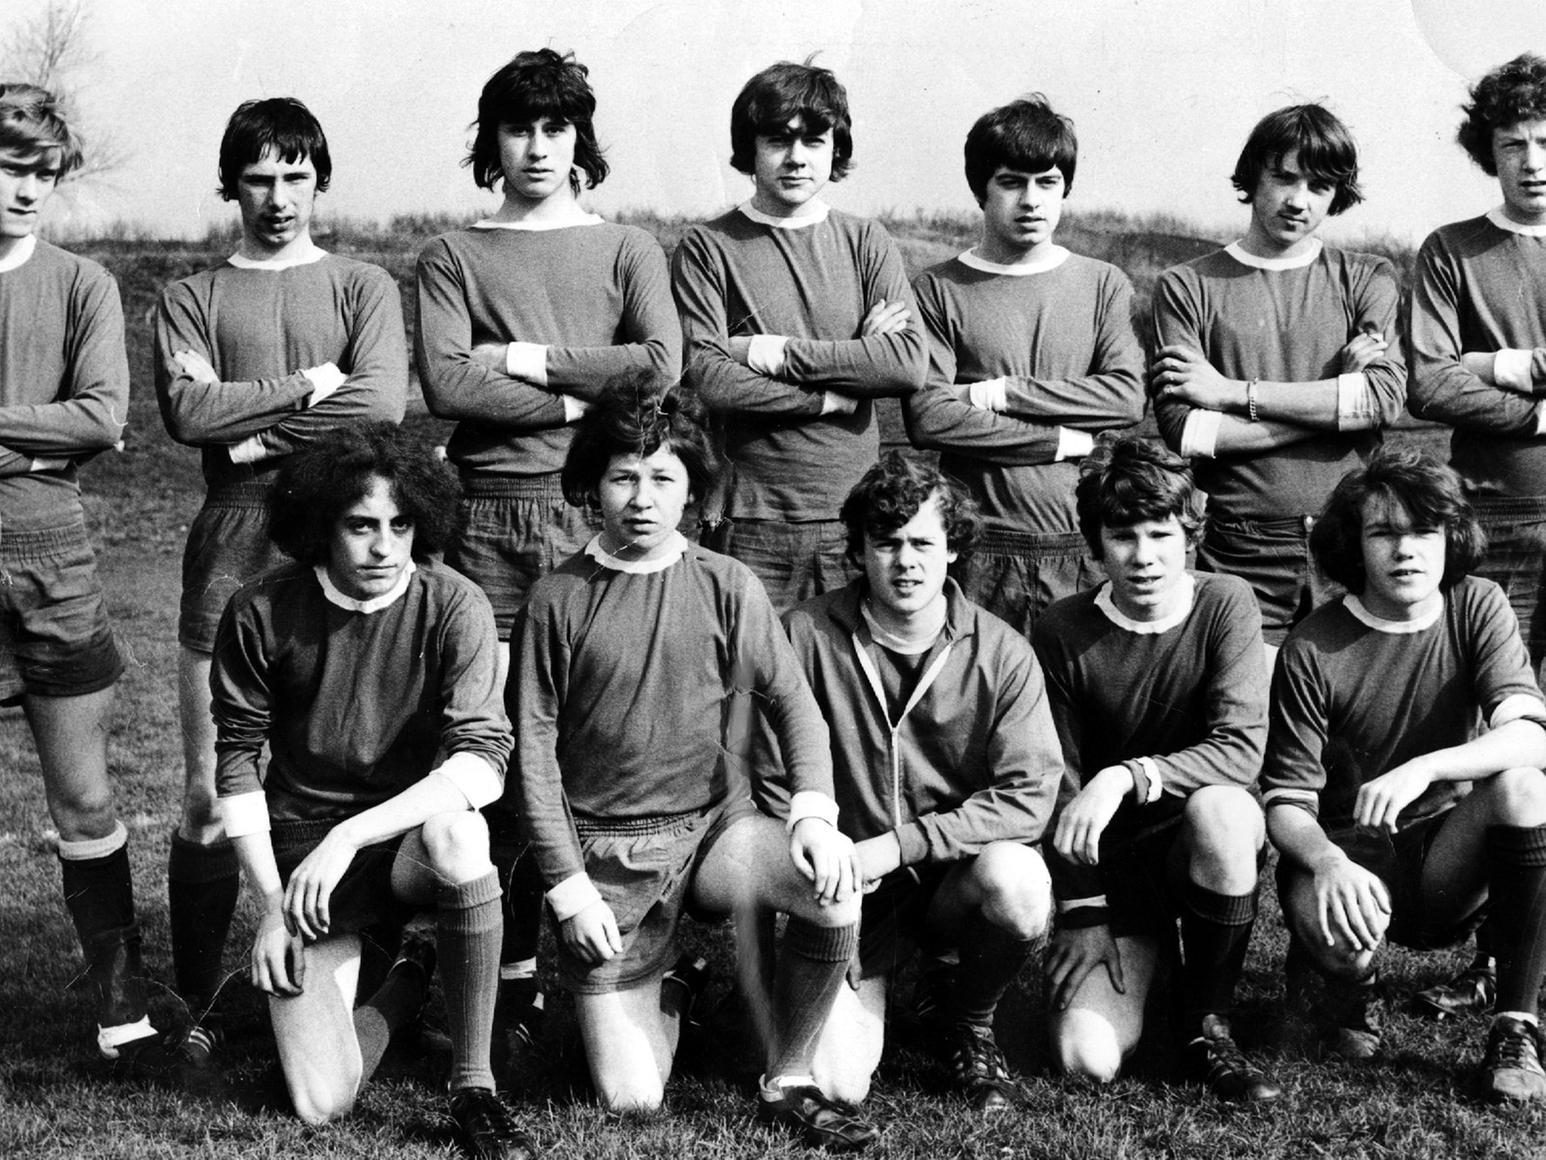 This is St Theresa's football team from the early 1980s when they beat Pudsey Juniors to lift the Leeds and District Minor Cup. They reformed in 1996 to play a charity match for Half and Half.